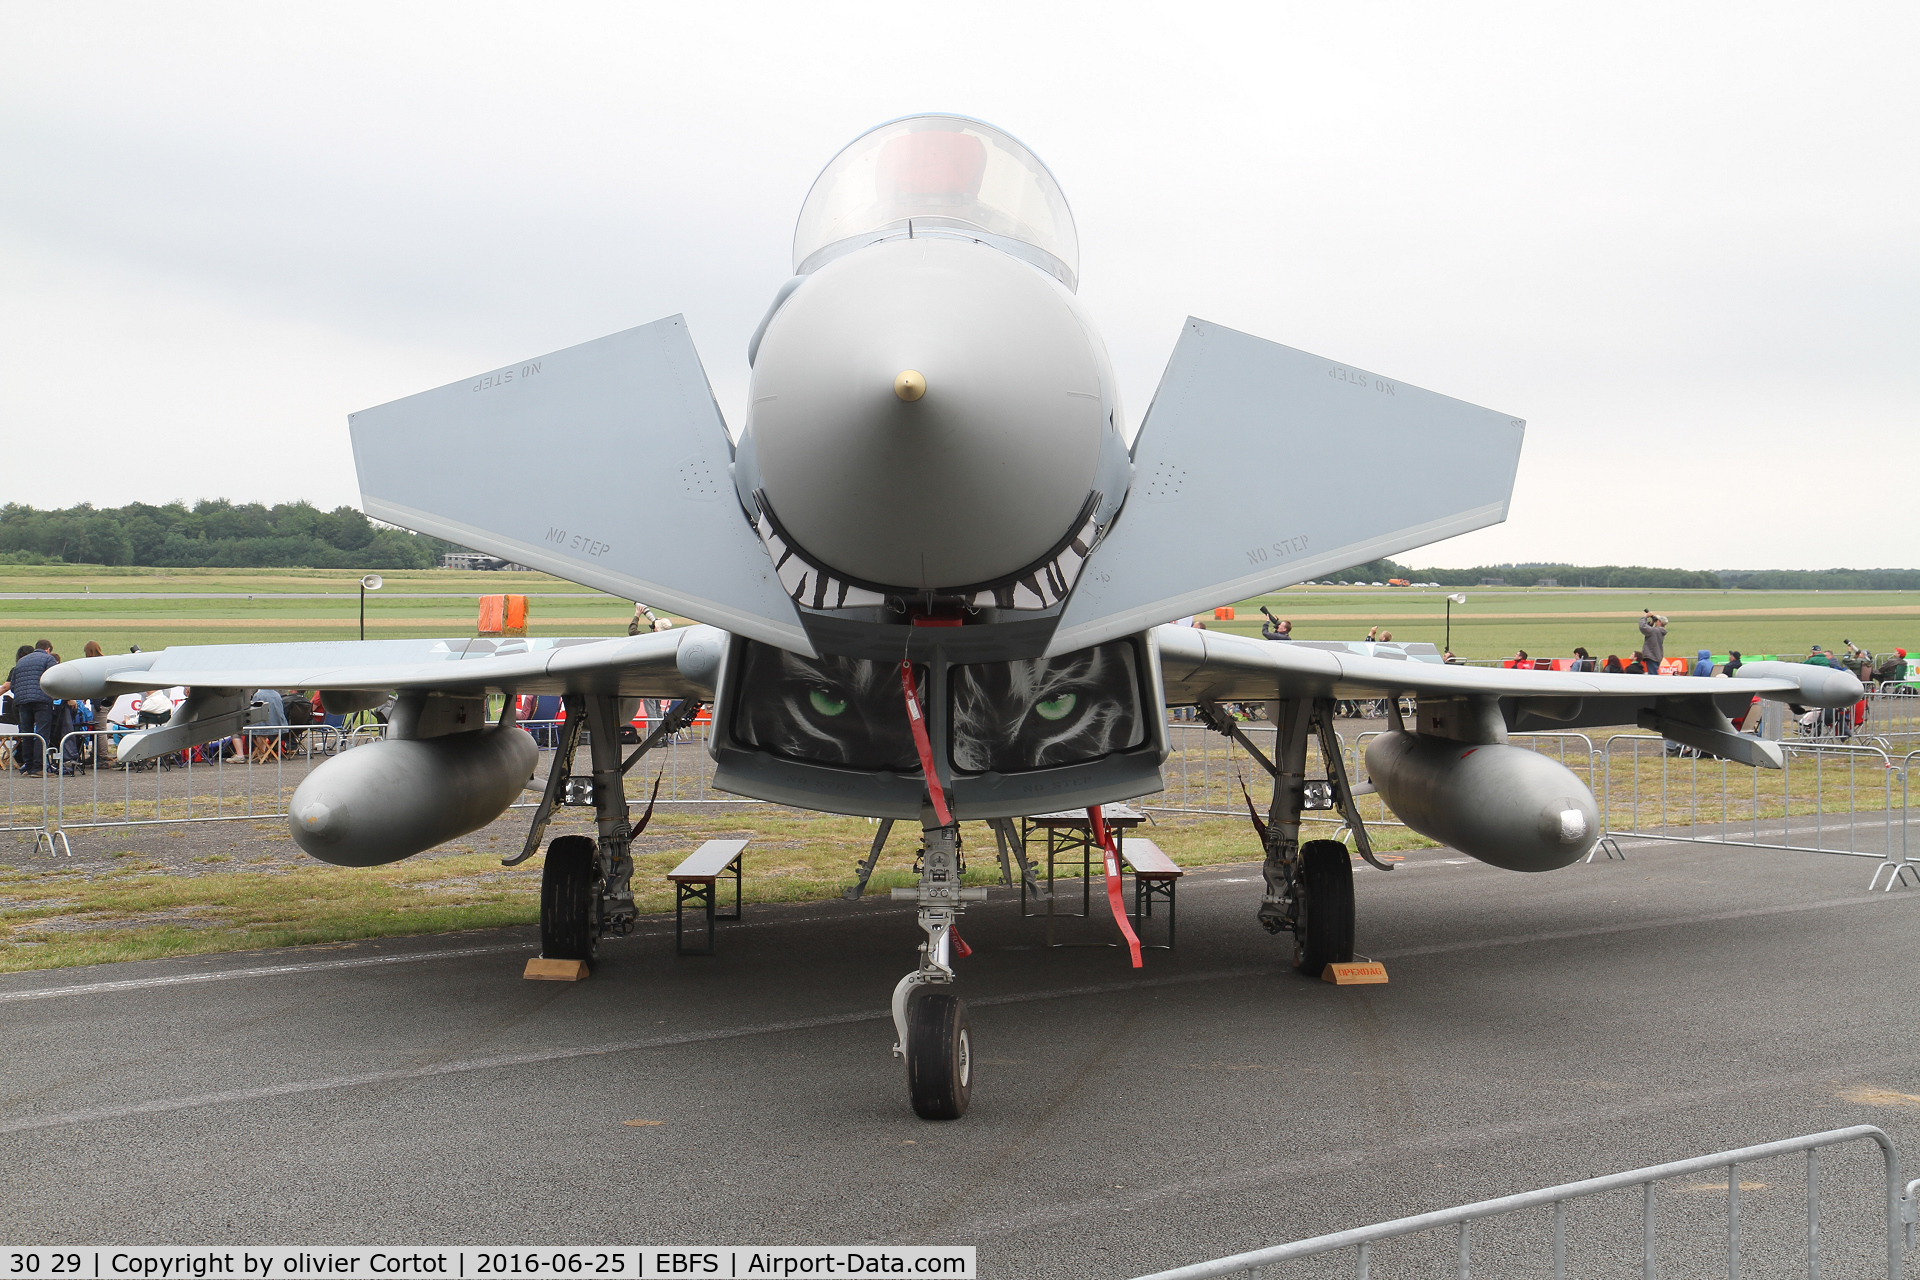 30 29, 2006 Eurofighter EF-2000 Typhoon S C/N 104/GS018, air intakes covers with special markings